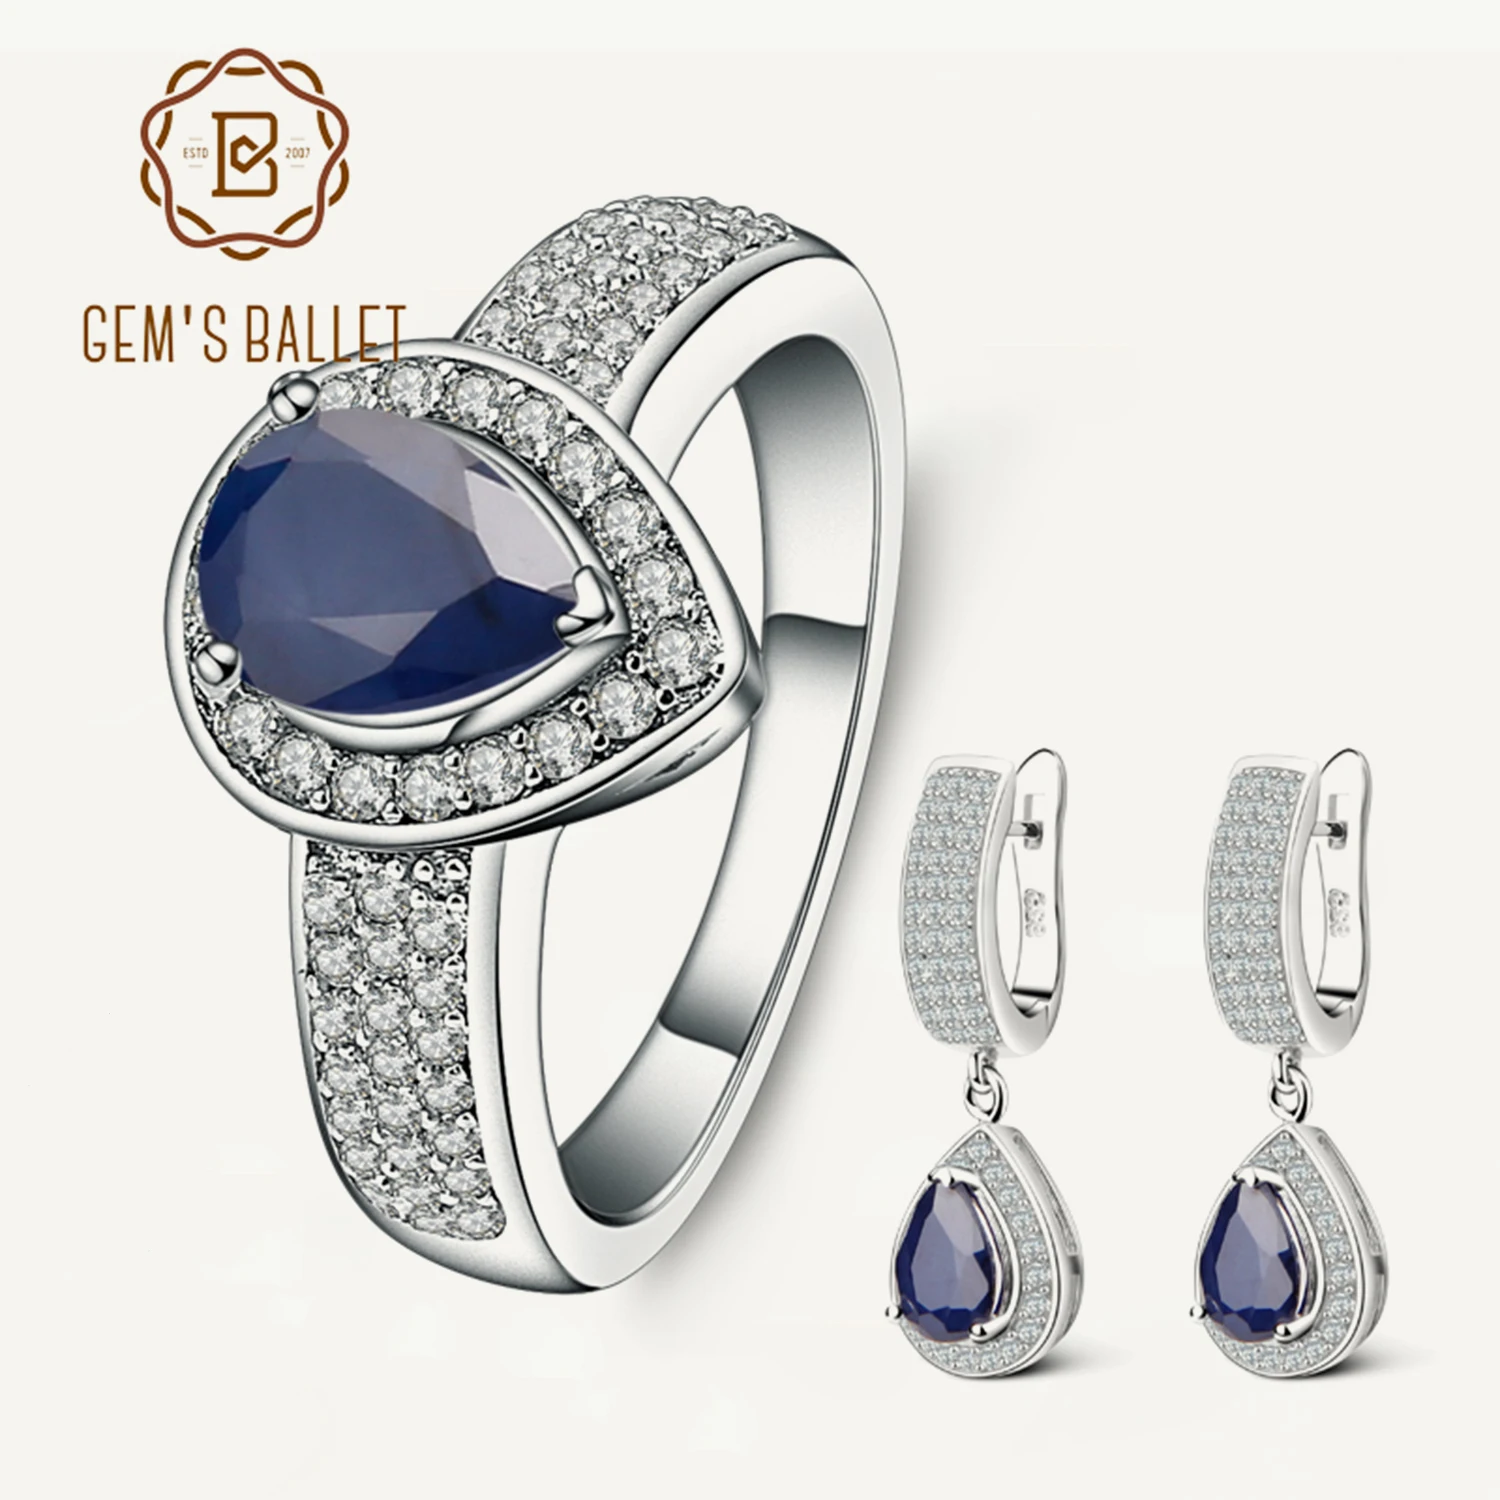 Natural Blue Sapphire Vintage Jewelry Sets 925 Sterling Silver Gemstone Earrings - $115.98